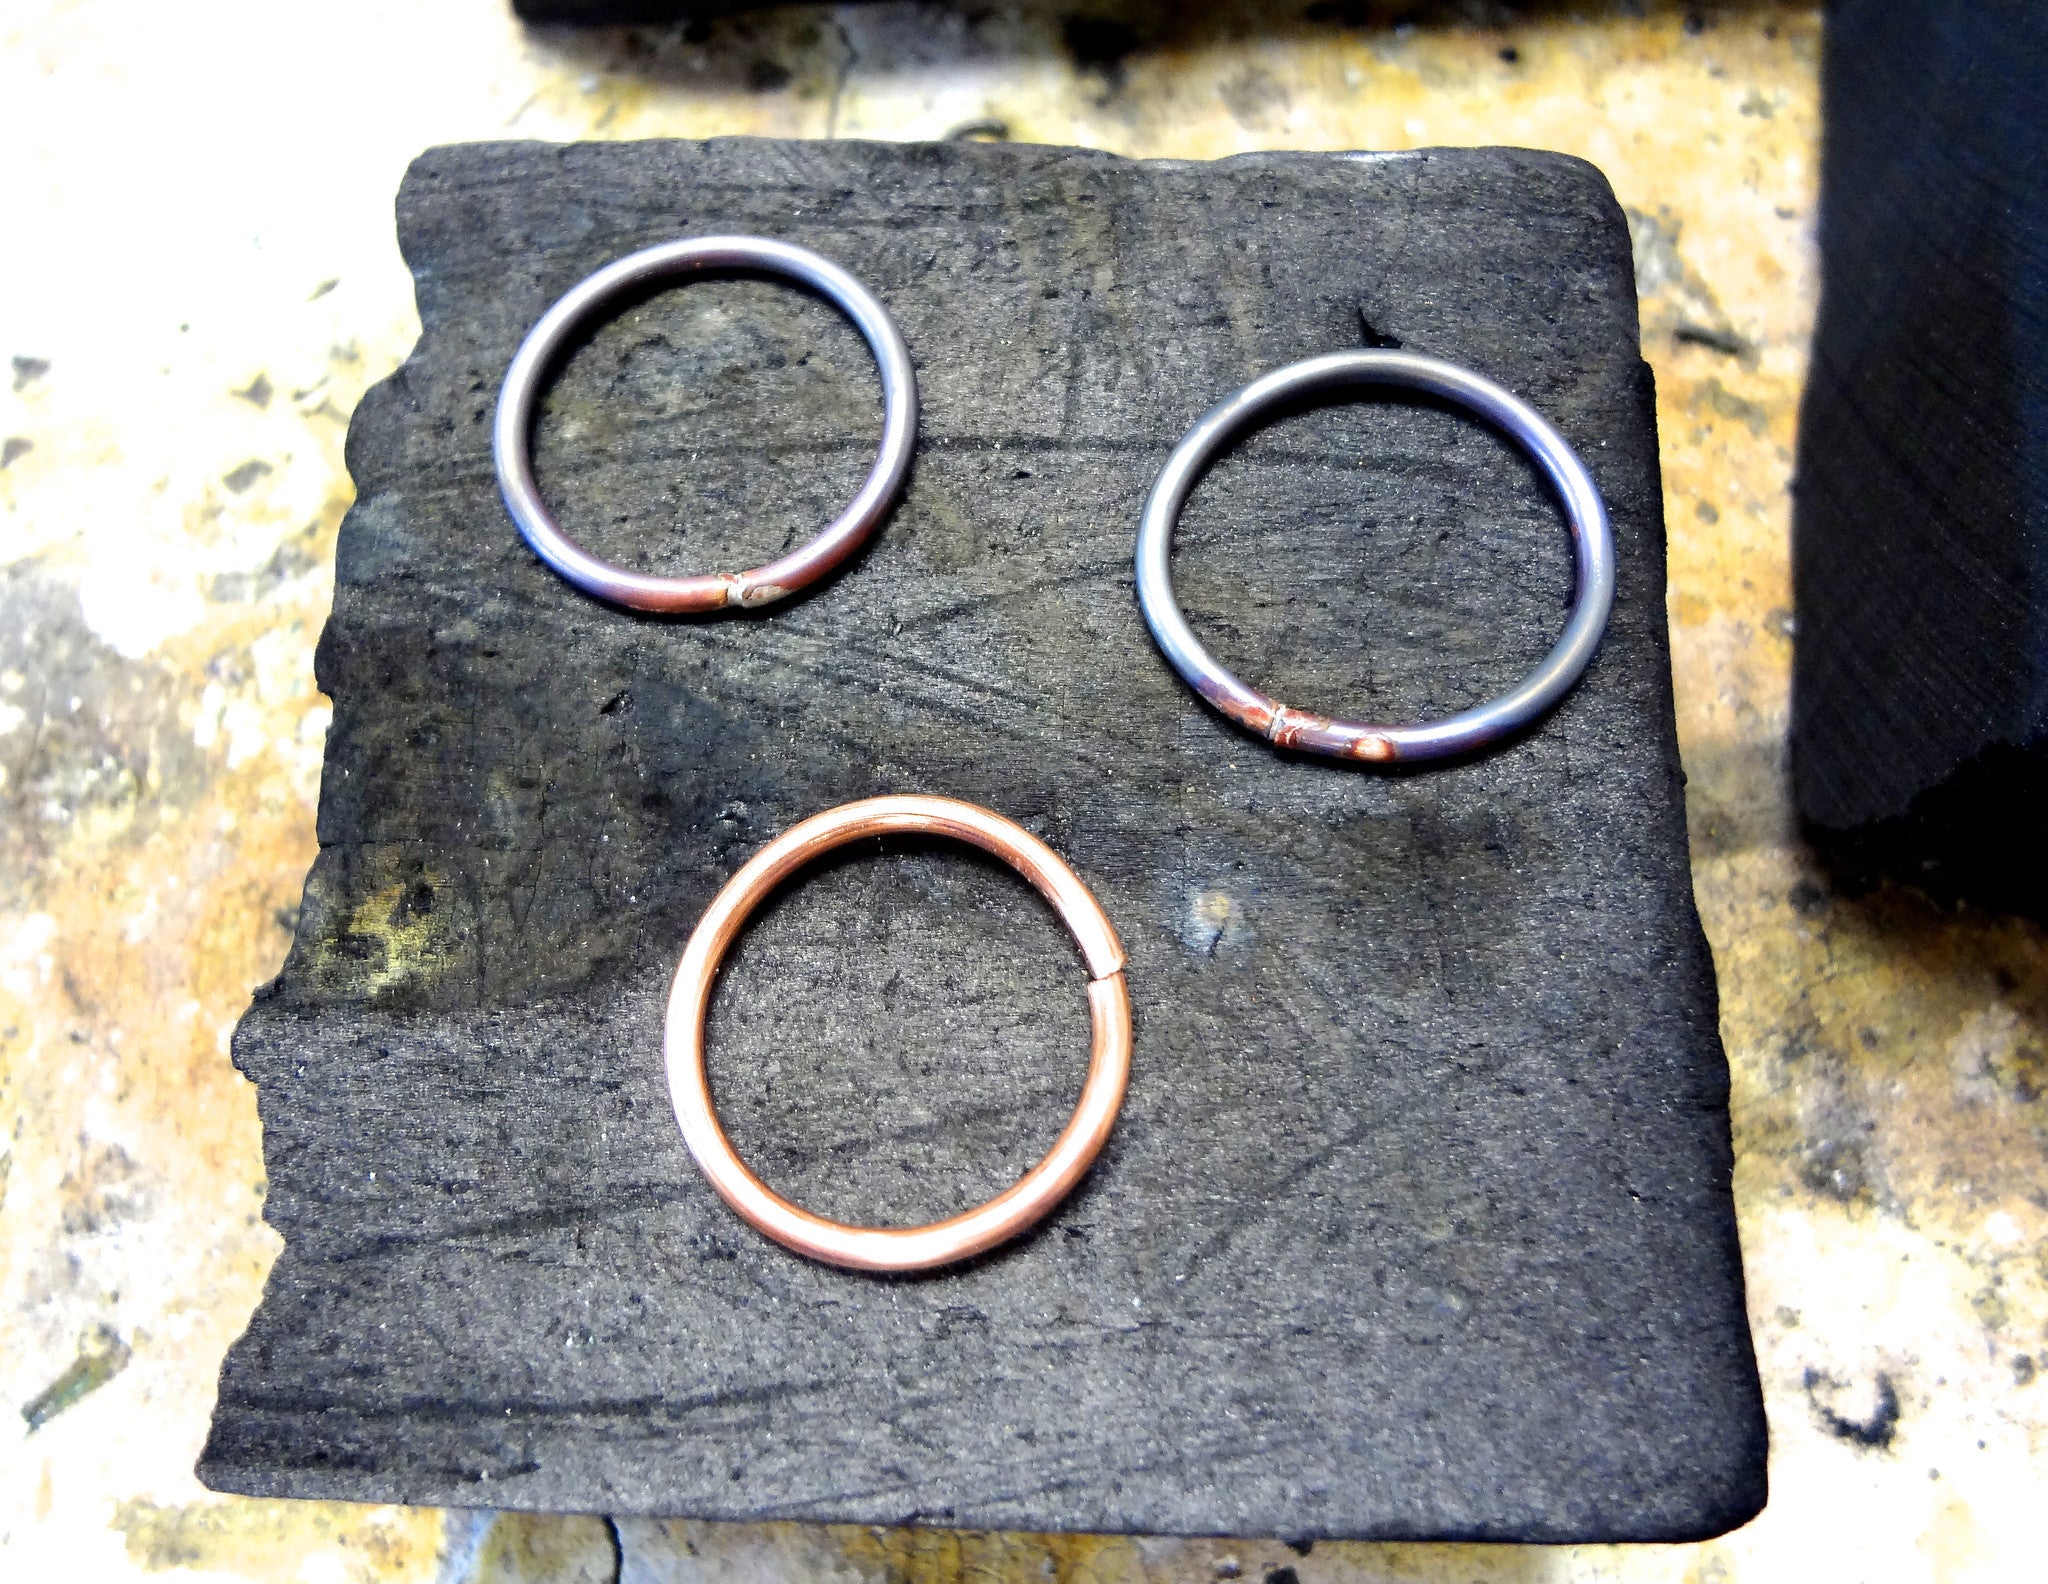 workshop / intro to working with metals + making stack rings